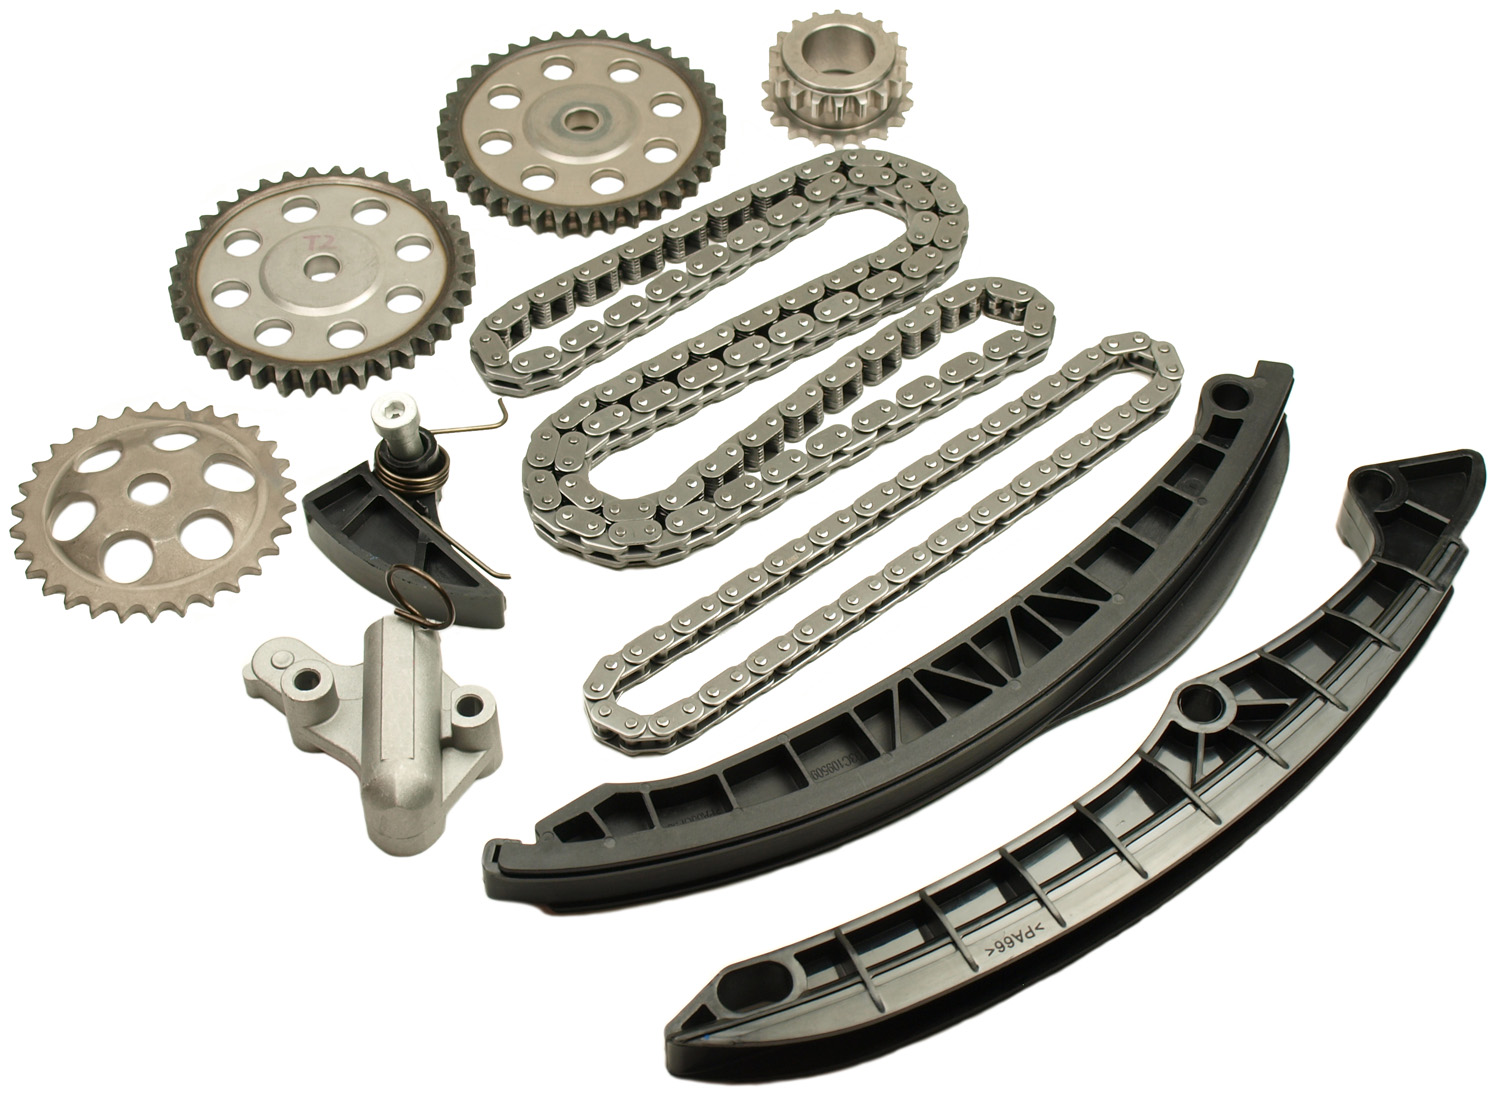 Cloyes utilizes the latest in design and technology to offer complete timing chain kits